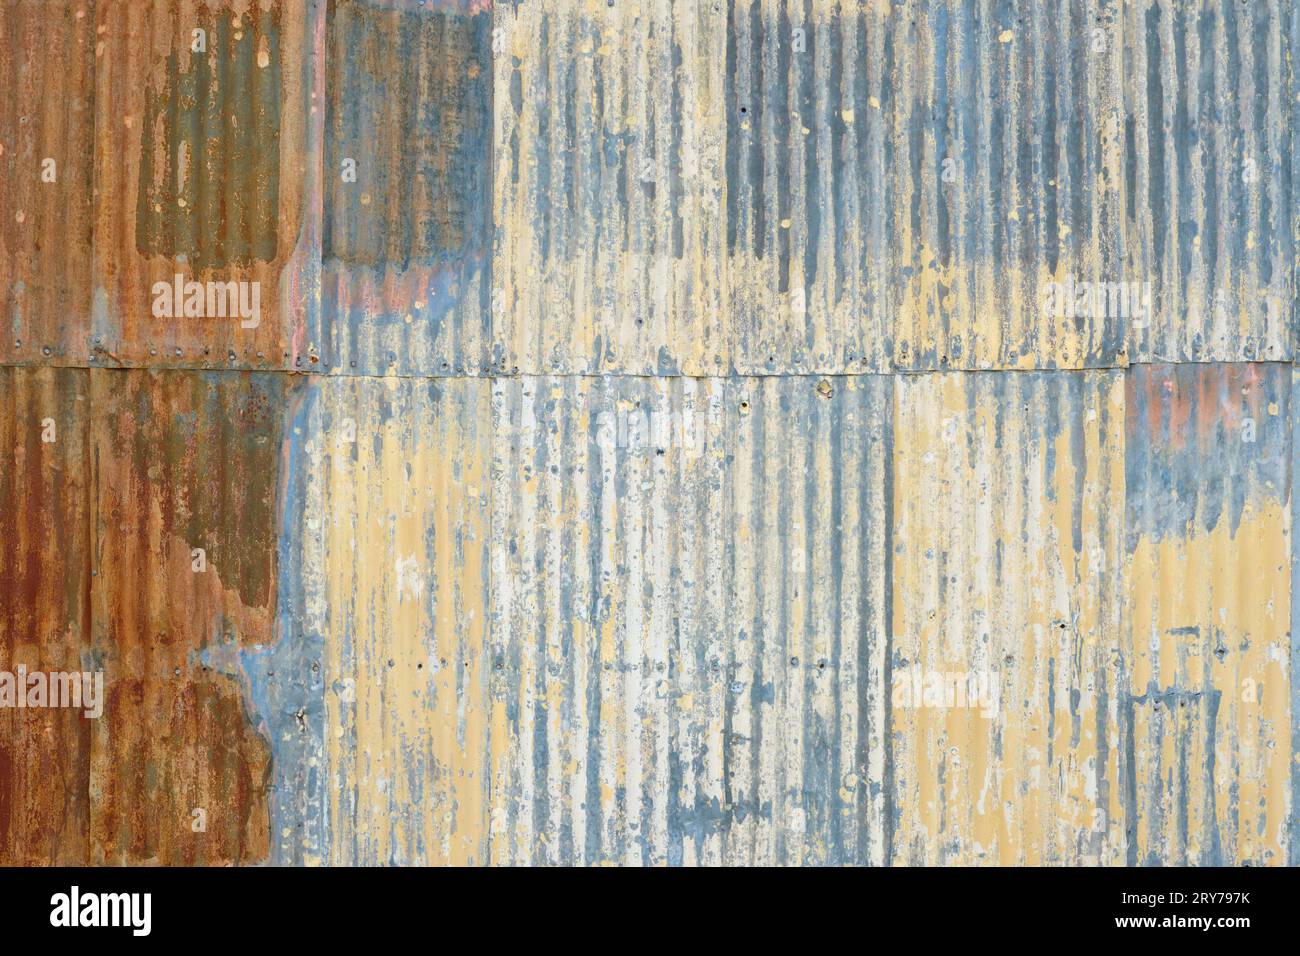 A rustic looking corrugated metal wall with patterns of colour. Stock Photo